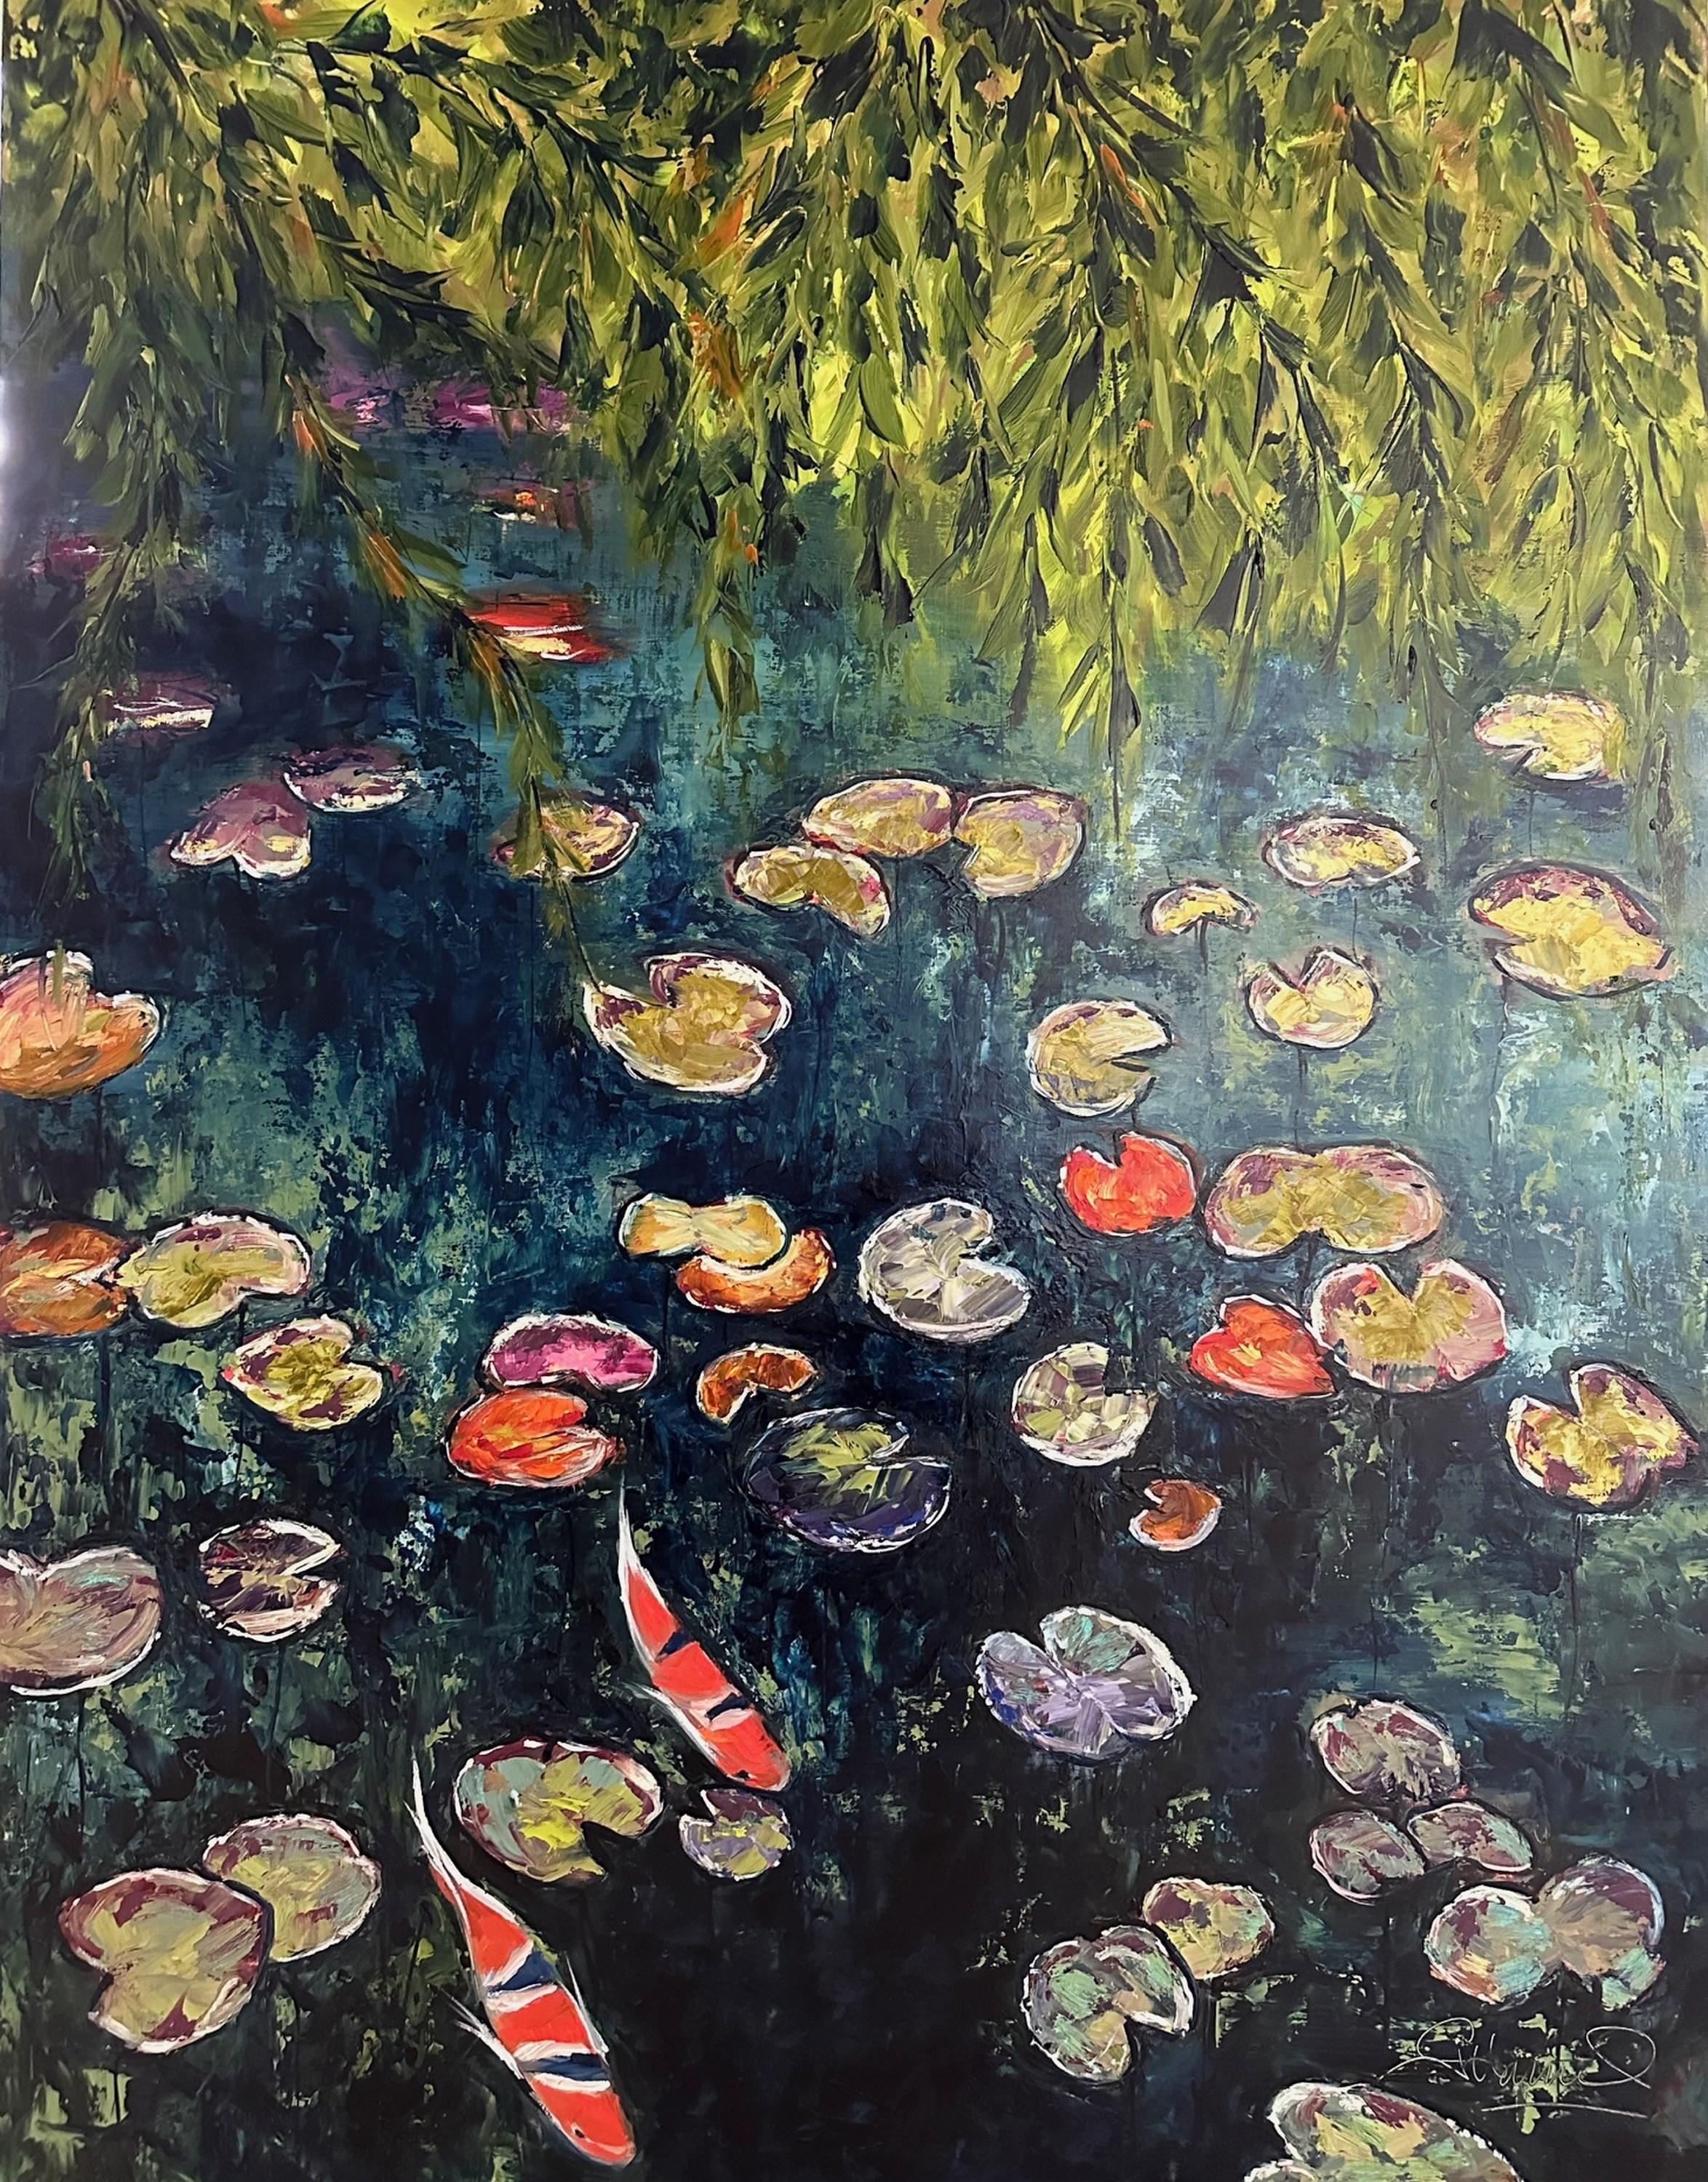 Genevieve Hamel
Deep Water
Oil on Wood Panel
Year: 2024
Size: 40 x 30 x 1.625 inches
Signed by hand
COA provided
Ref.: 924802-2088

Somewhere in the bottom of this pond, swim beautiful koi fishes. Their bright colors are almost getting in complement